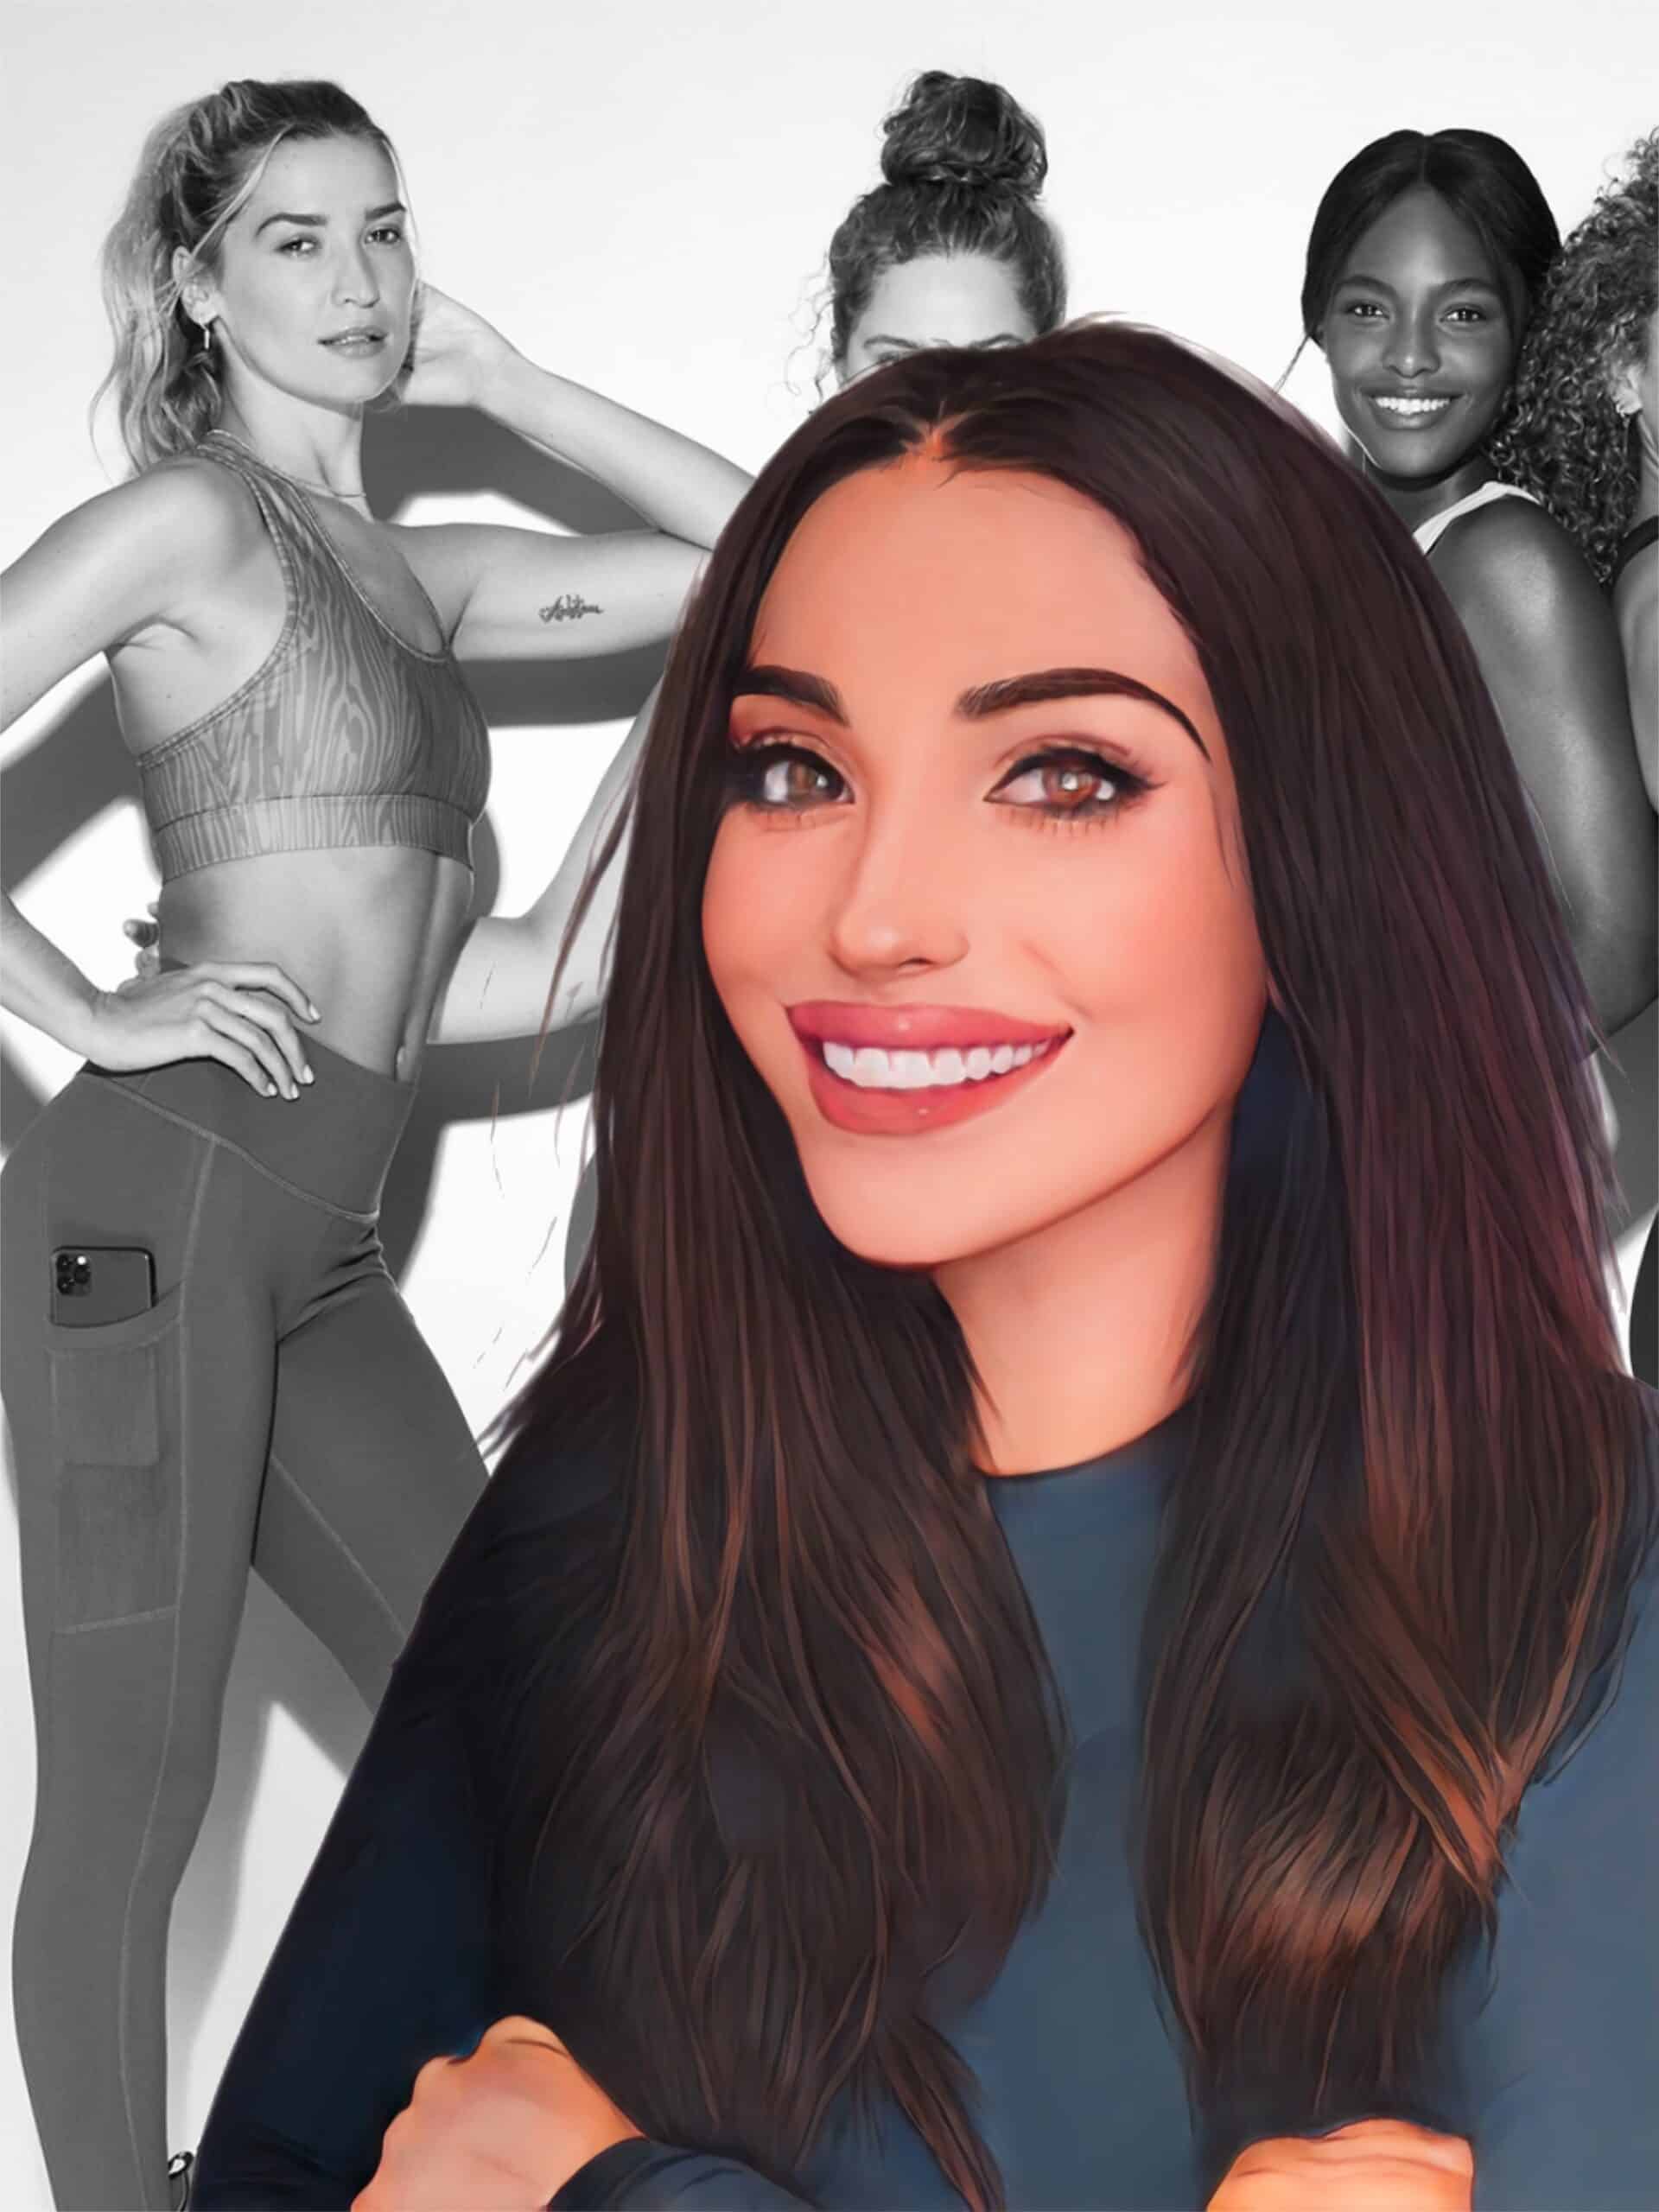 New Fabletics CMO Ilona Aman wants to take the brand beyond